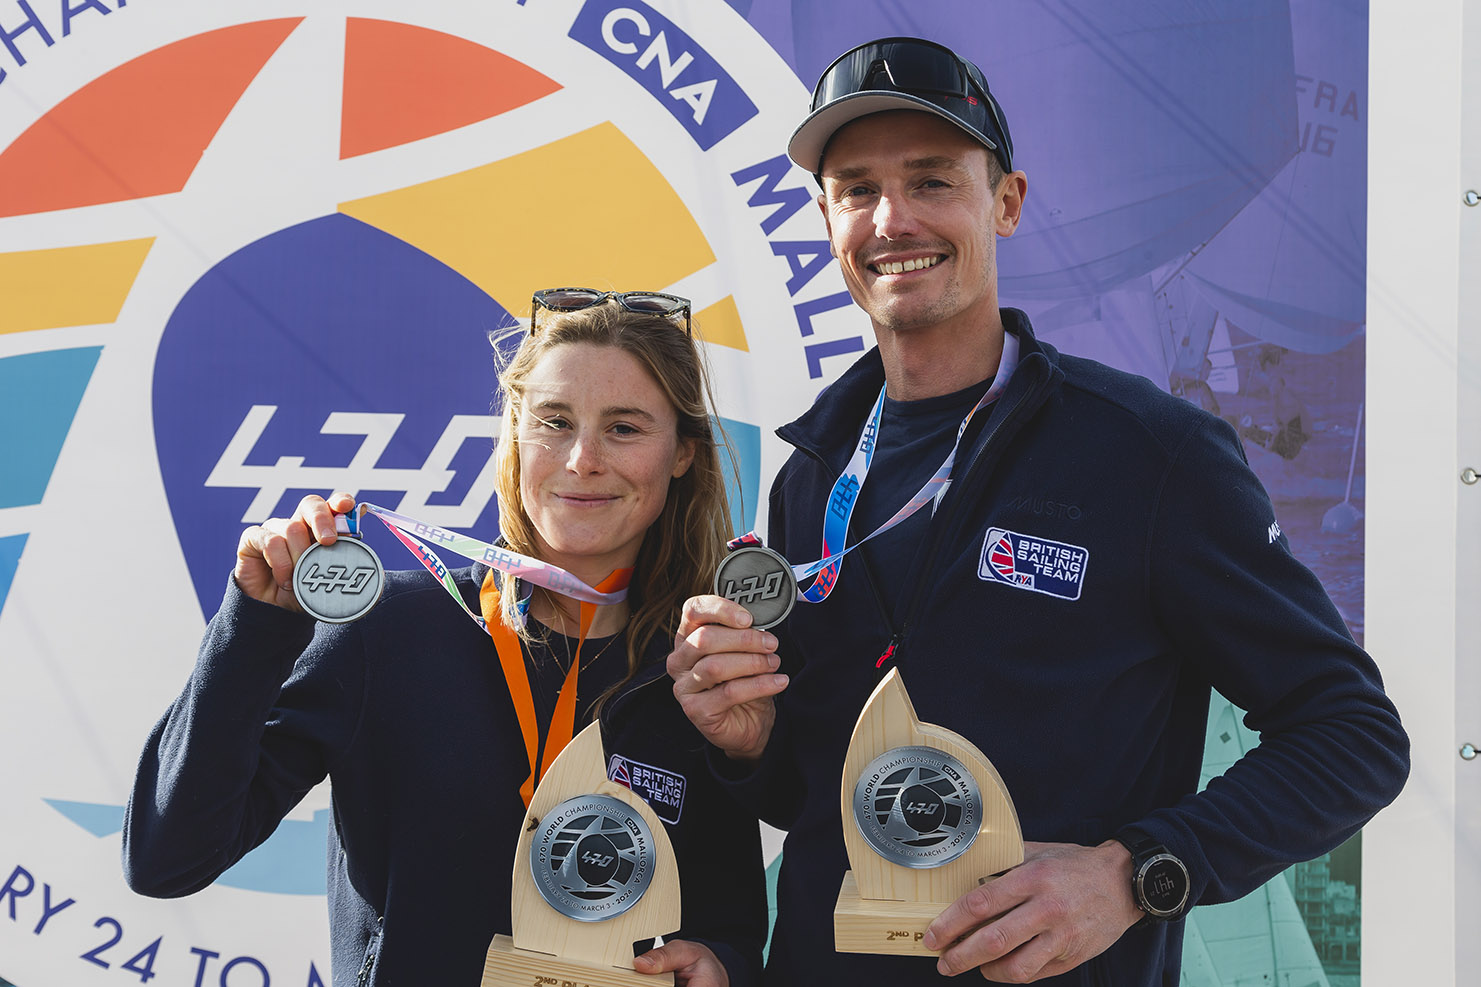 A silver medal at the 470 World Championship secured Team GB selection for Heathcote and Grube. © Bernardi Biblioni